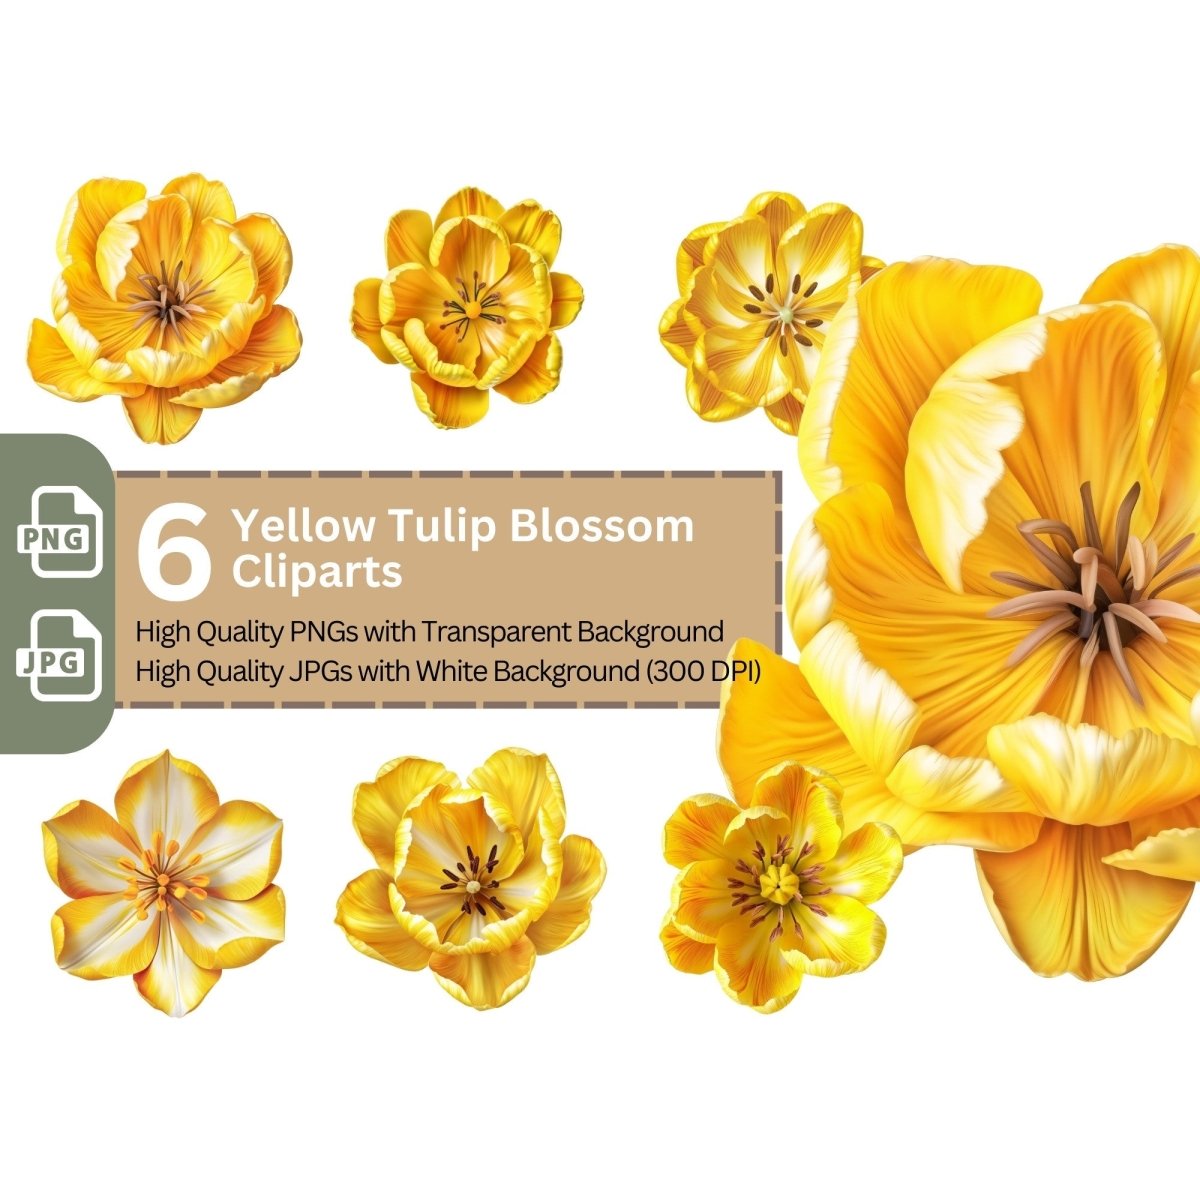 Yellow Tulip Blossom 6+6 PNG Clipart Bundle, Transparent Background, Photorealistic - Everything Pixel